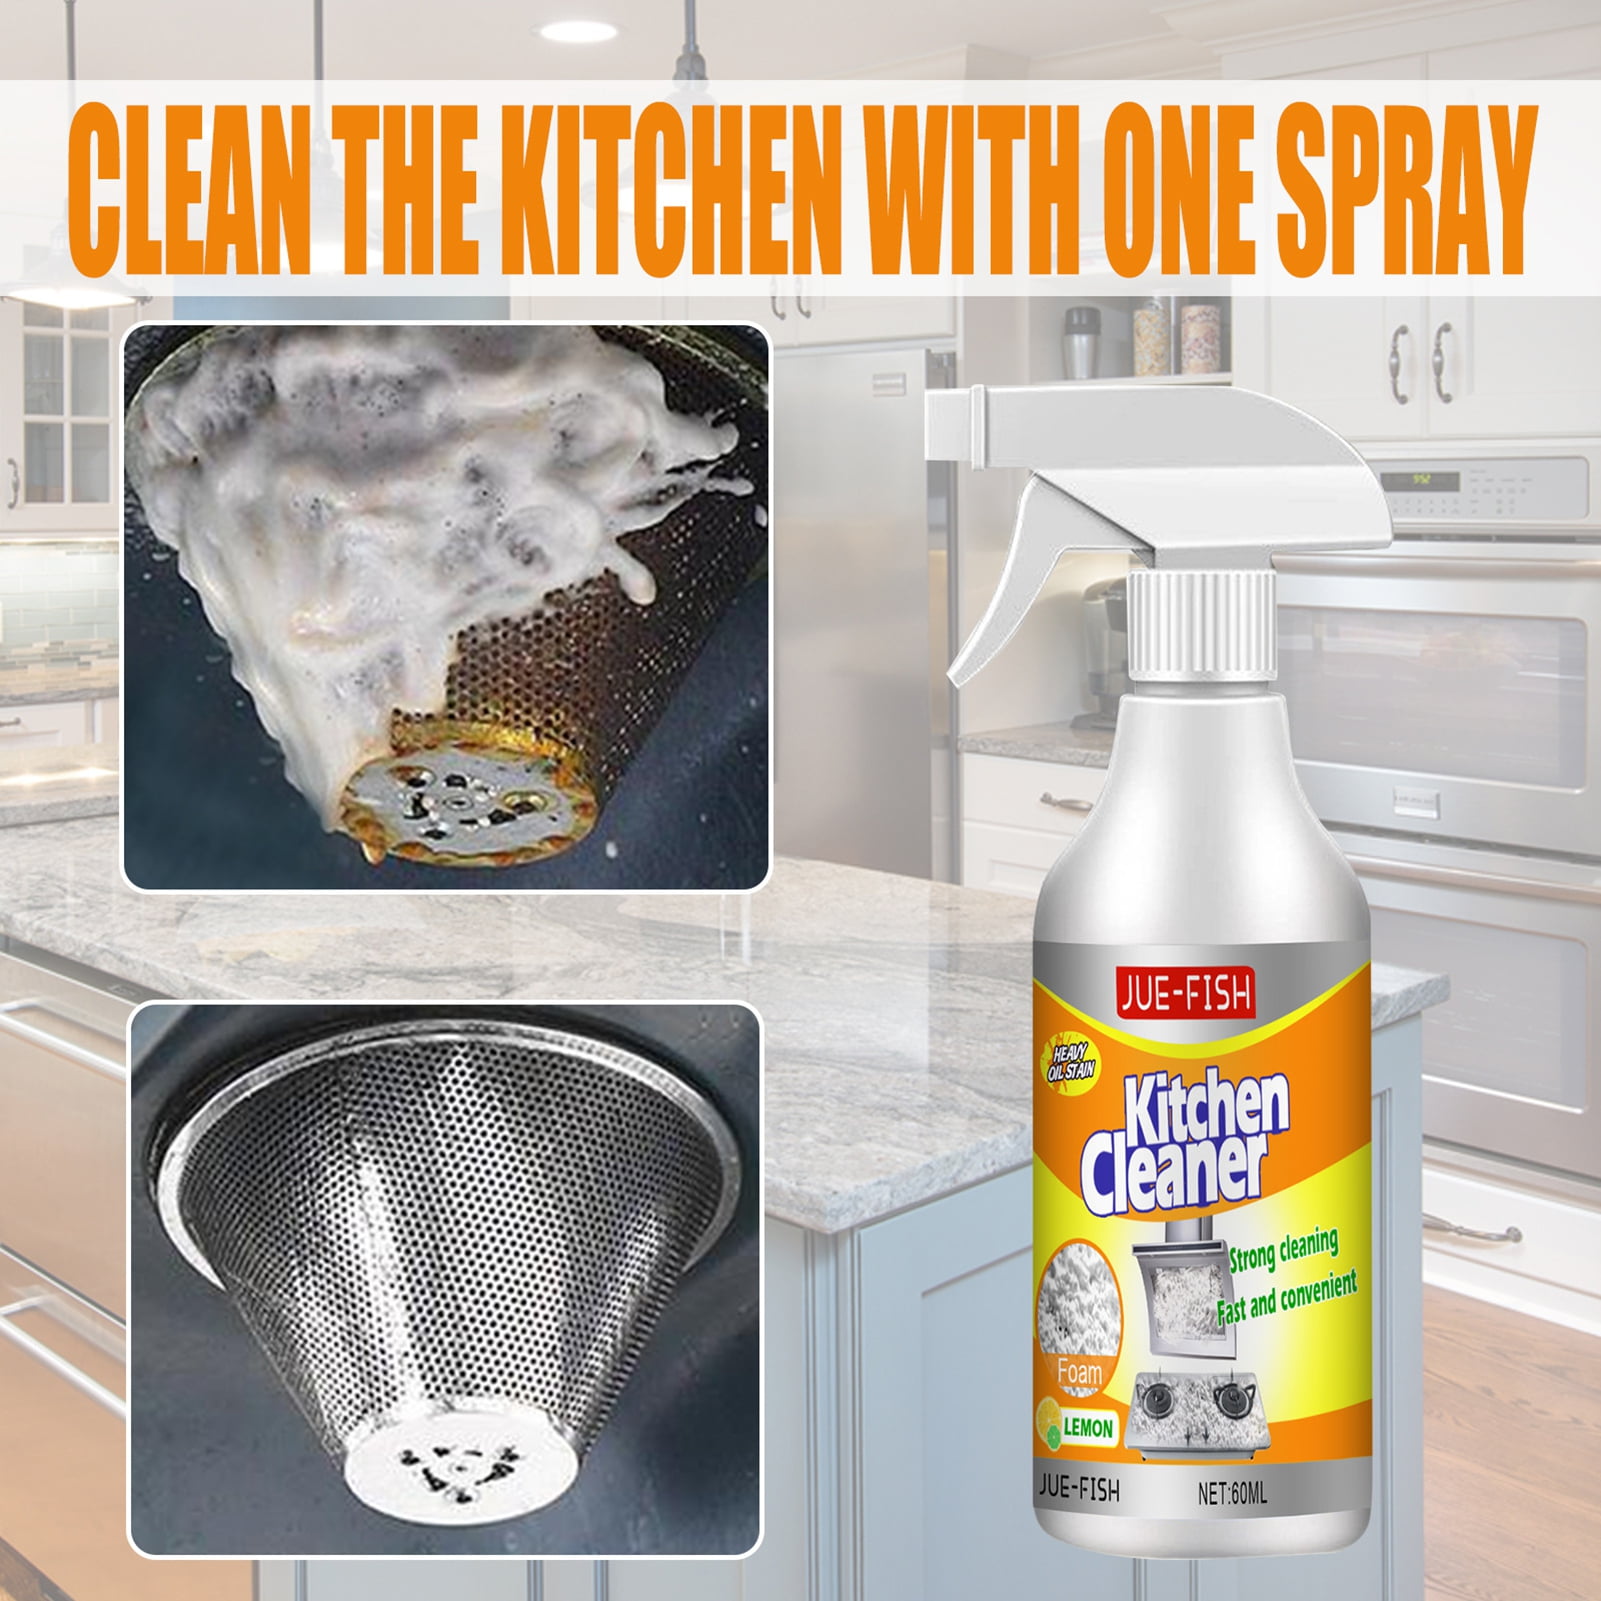 Lysol Pro Kitchen Spray Cleaner and Degreaser, Antibacterial All Purpose  Cleaning Spray for Kitchens, Countertops, Ovens, and Appliances, Citrus